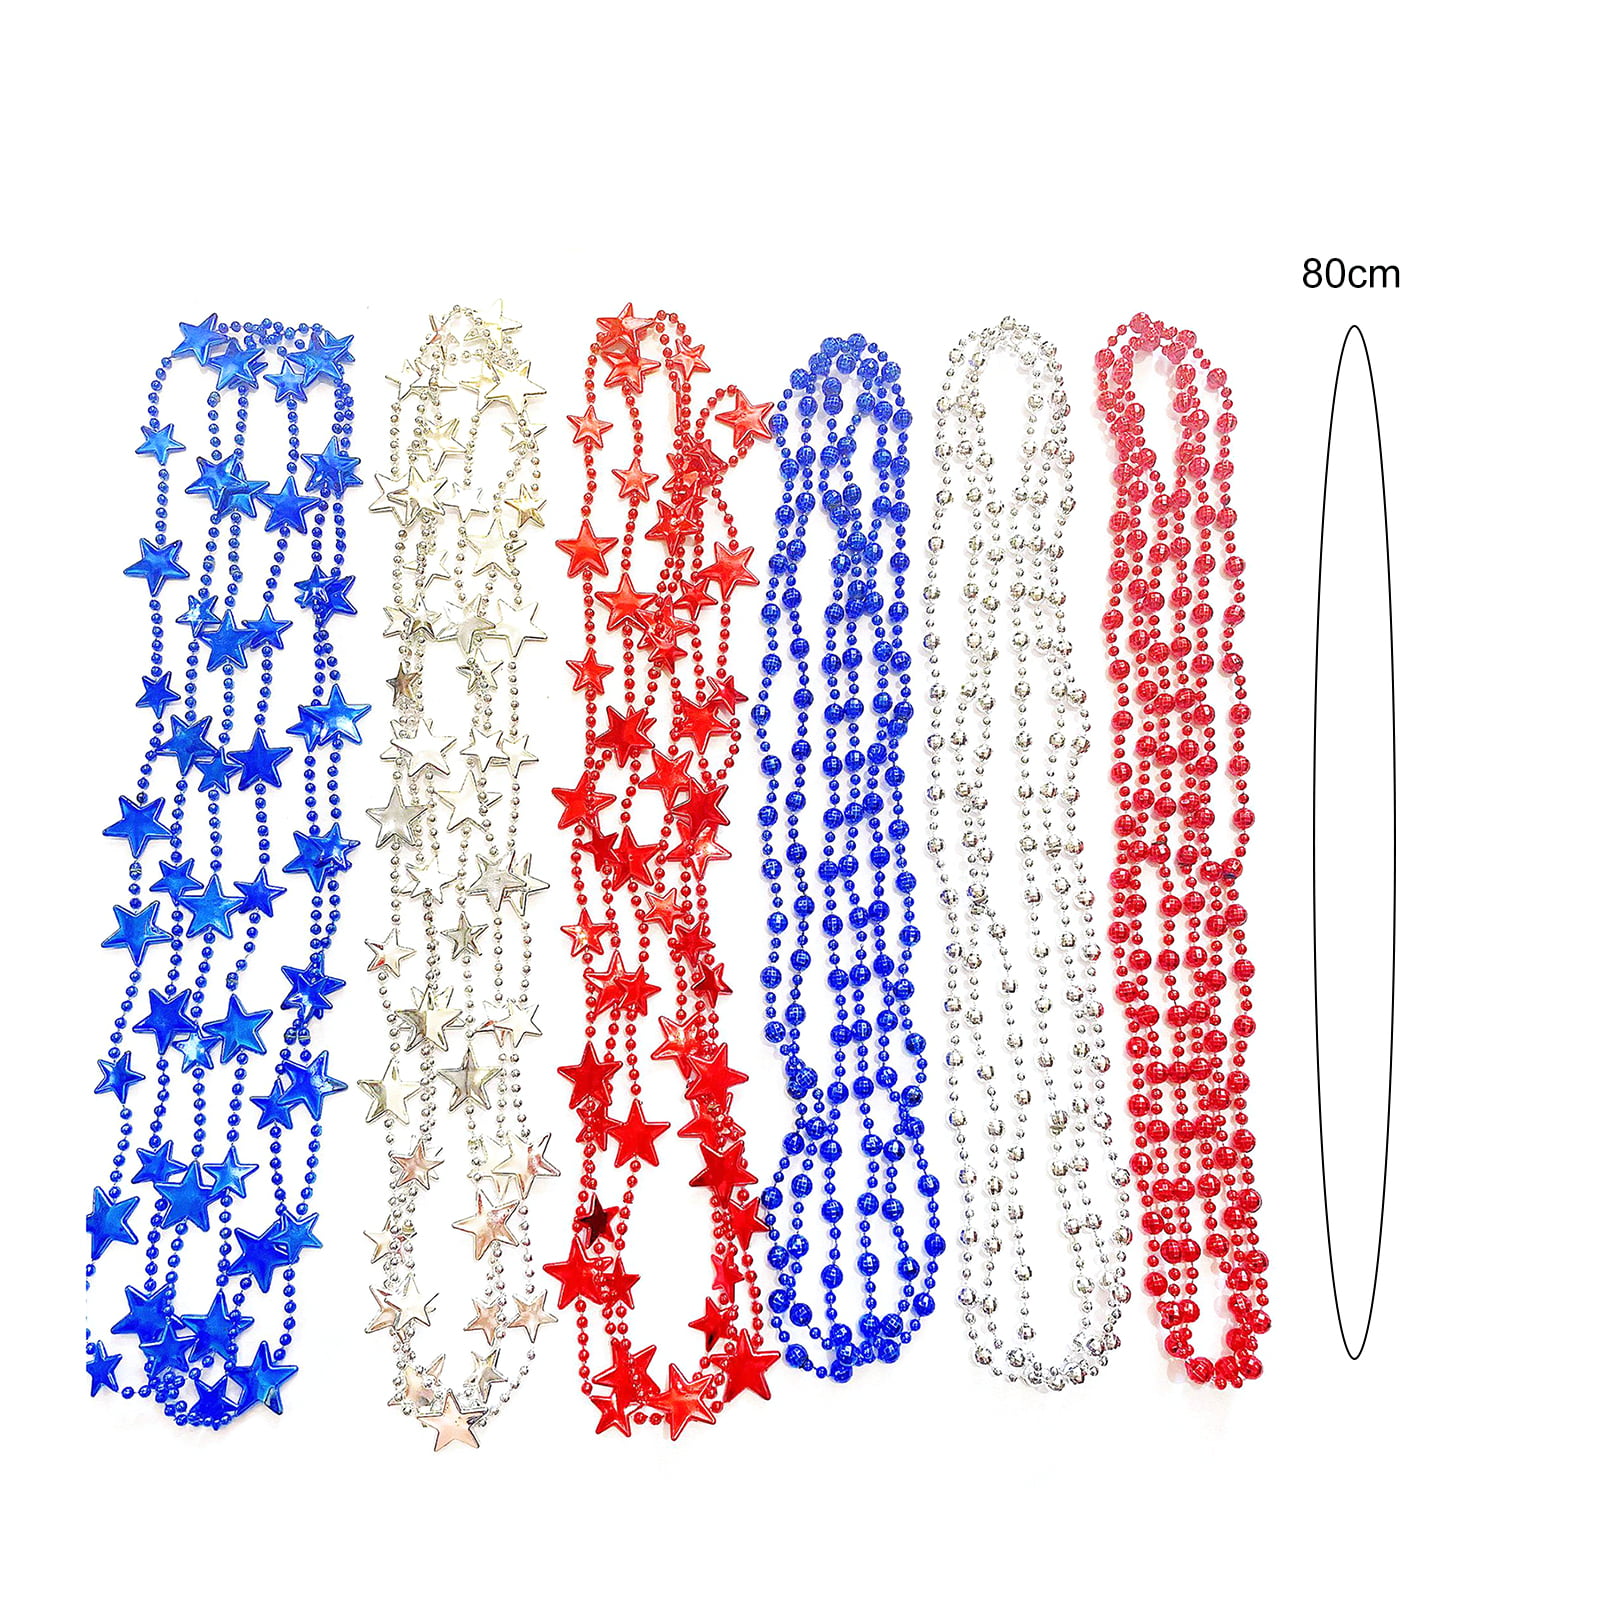 ArtCreativity Patriotic Beads Necklaces - Pack of 12 - Red White and Blue Beaded Necklaces for 4th of July Independence Day Memorial Day Mardi